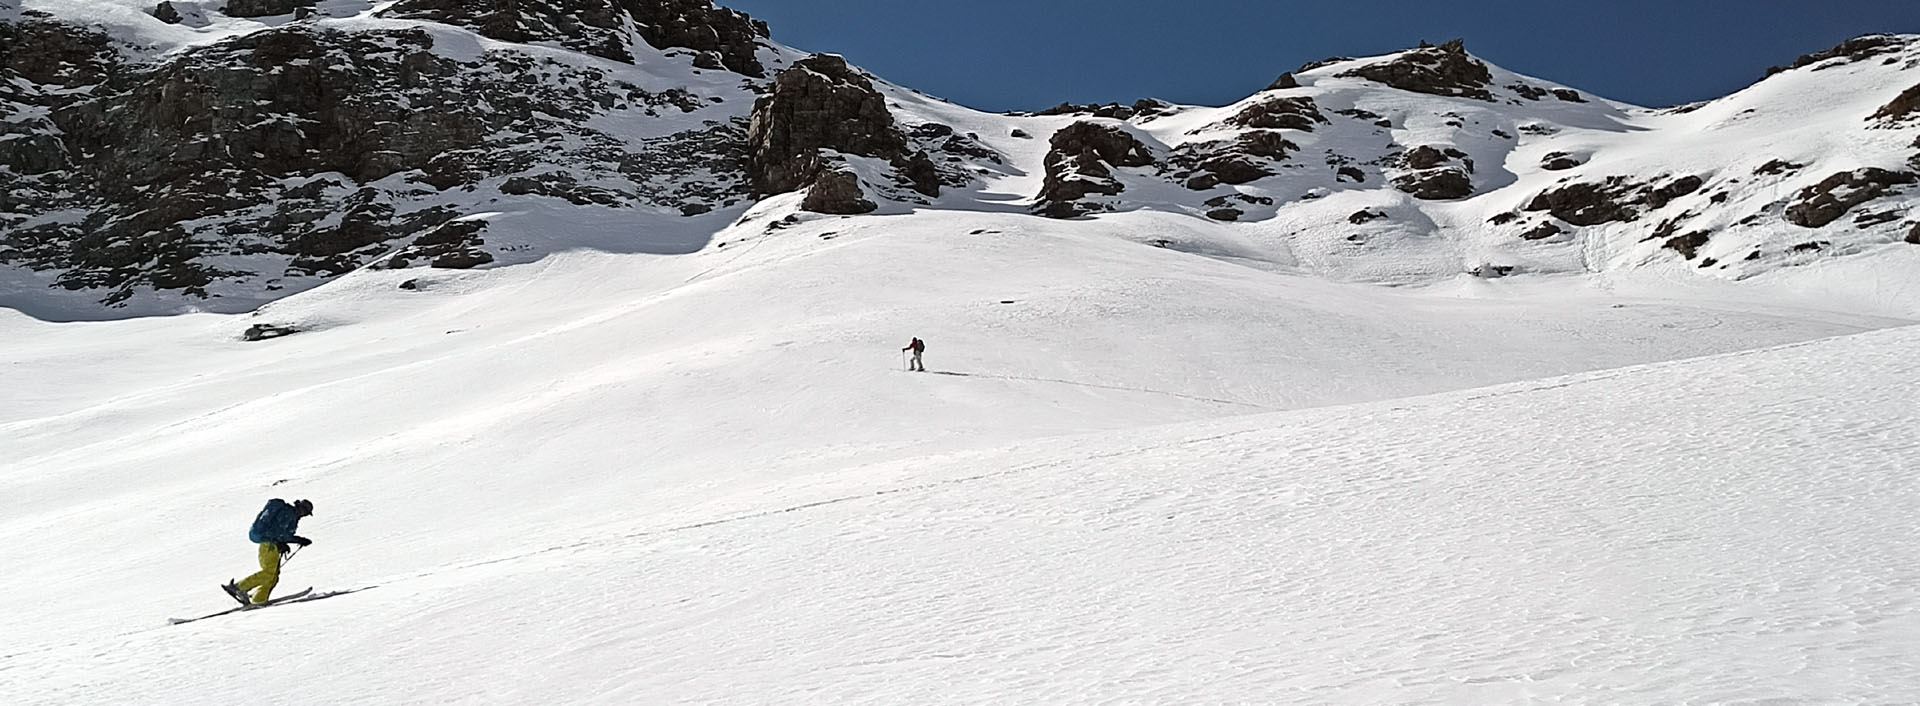 Ascent descent Adventures guides Skiing during Alpine Ski Mountaineering Course (Bravura)